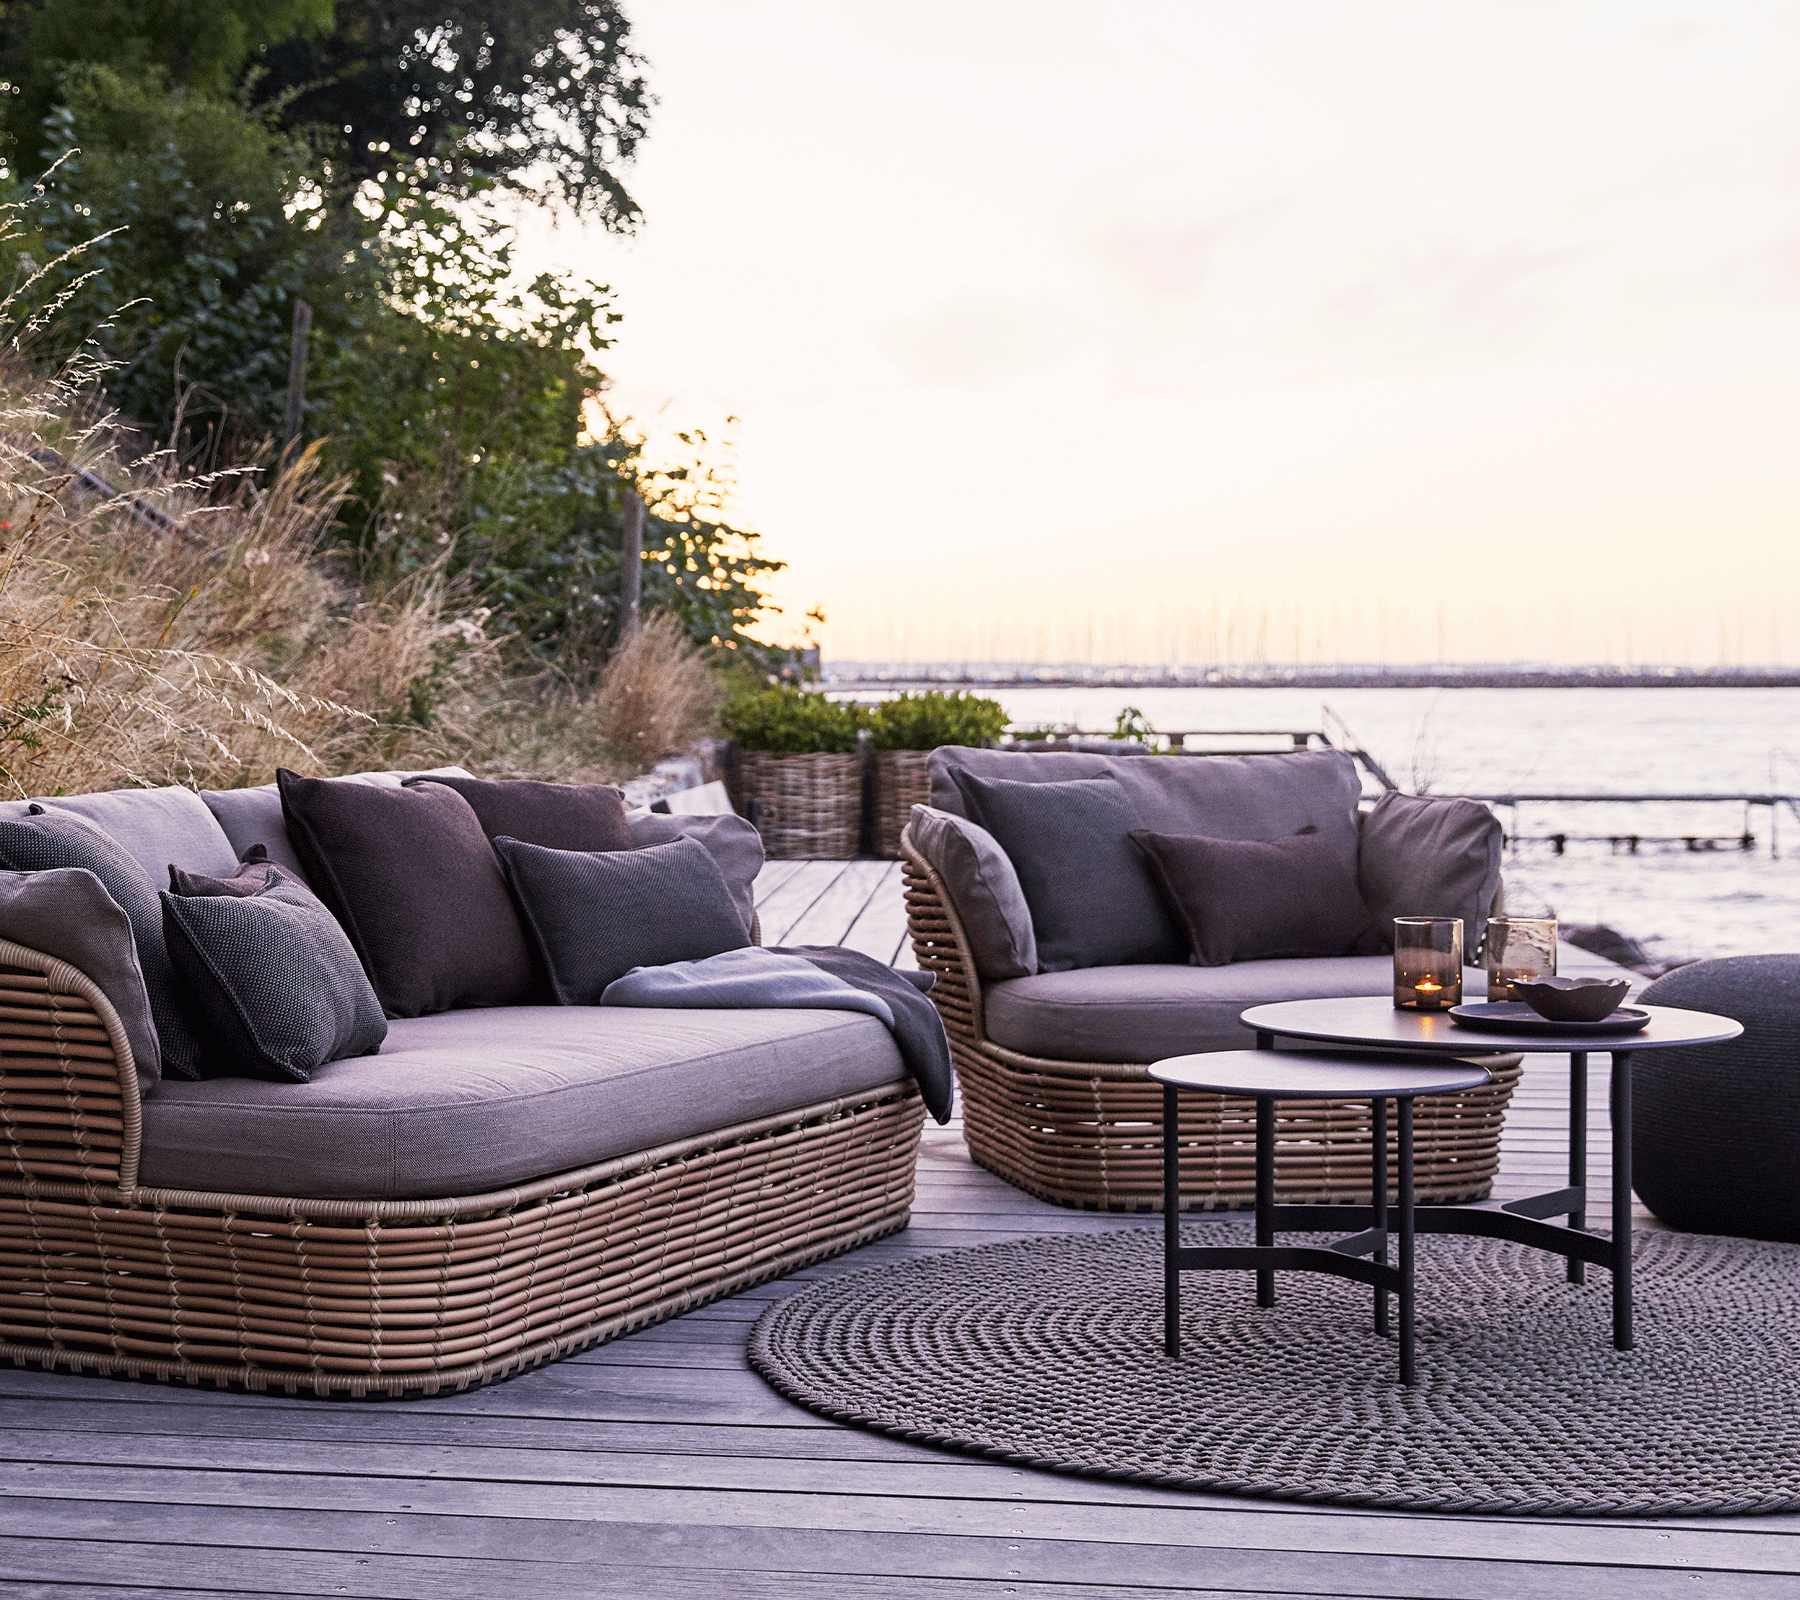 Boxhiil's Discover Round Outdoor Rug Taupe lifestyle image with 3-seater sofa, lounge chair and round table at the center